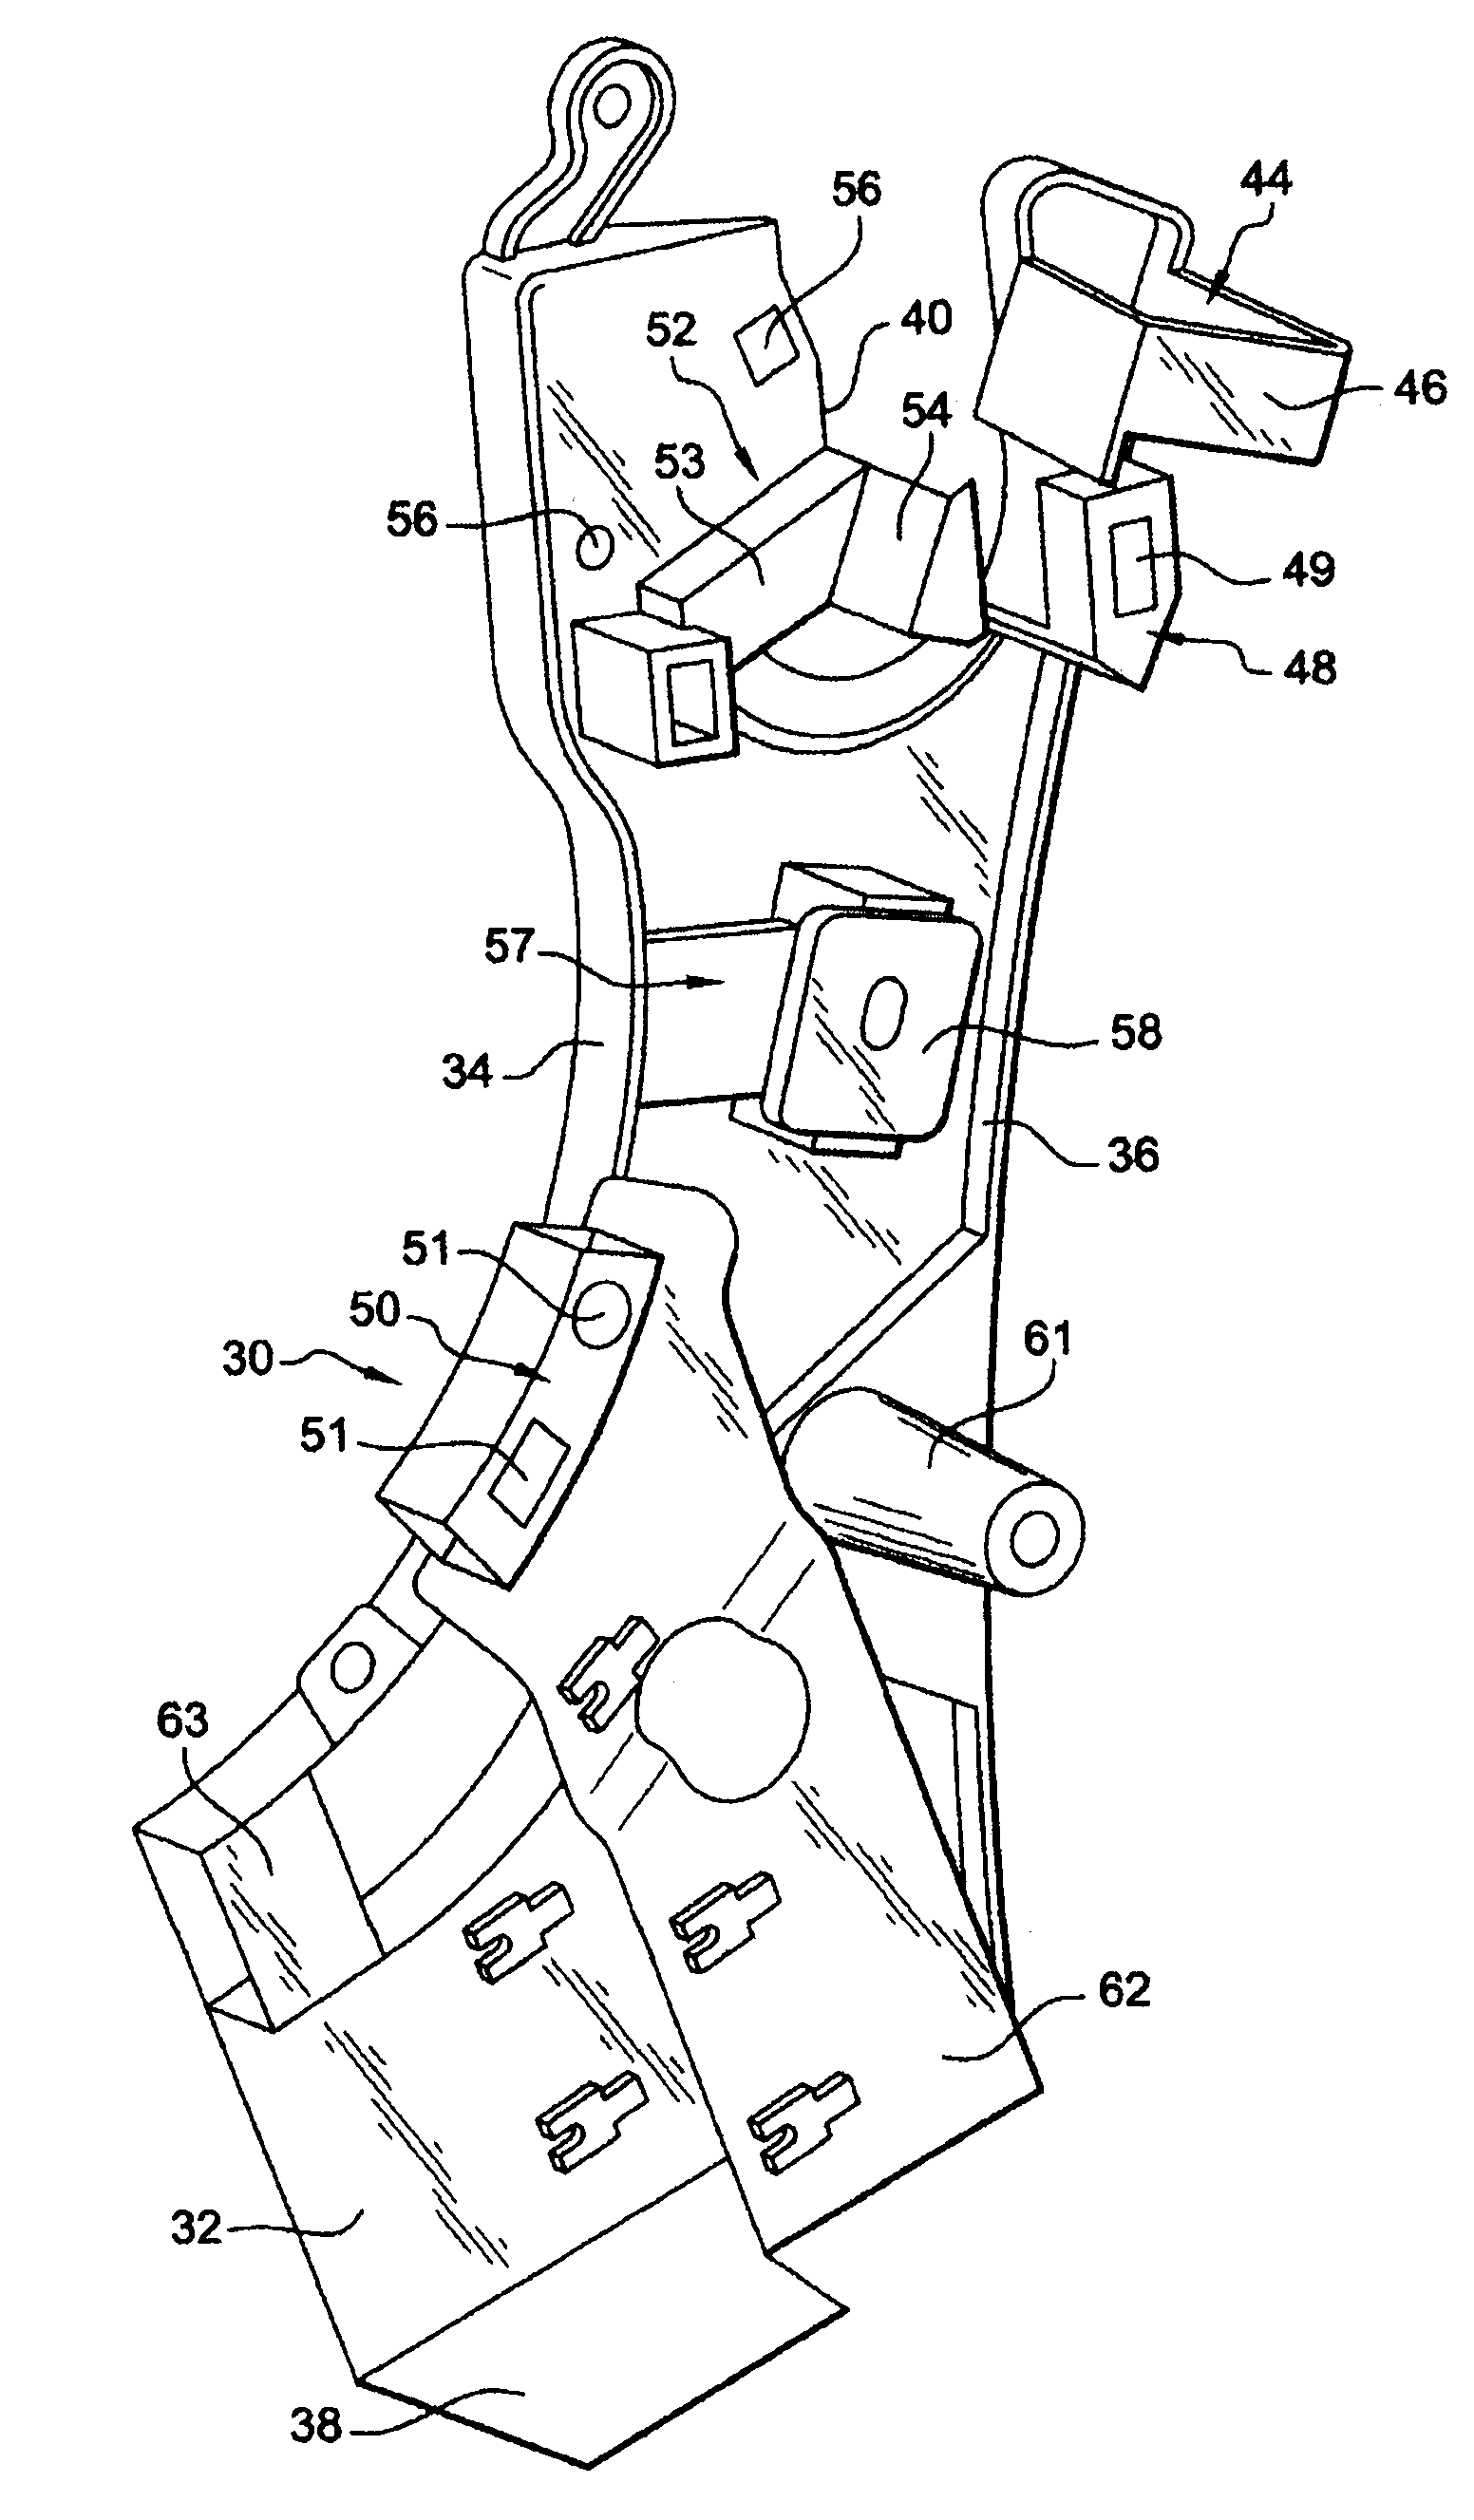 Support for one or more elements which are intended to be fastened to a motor vehicle structure